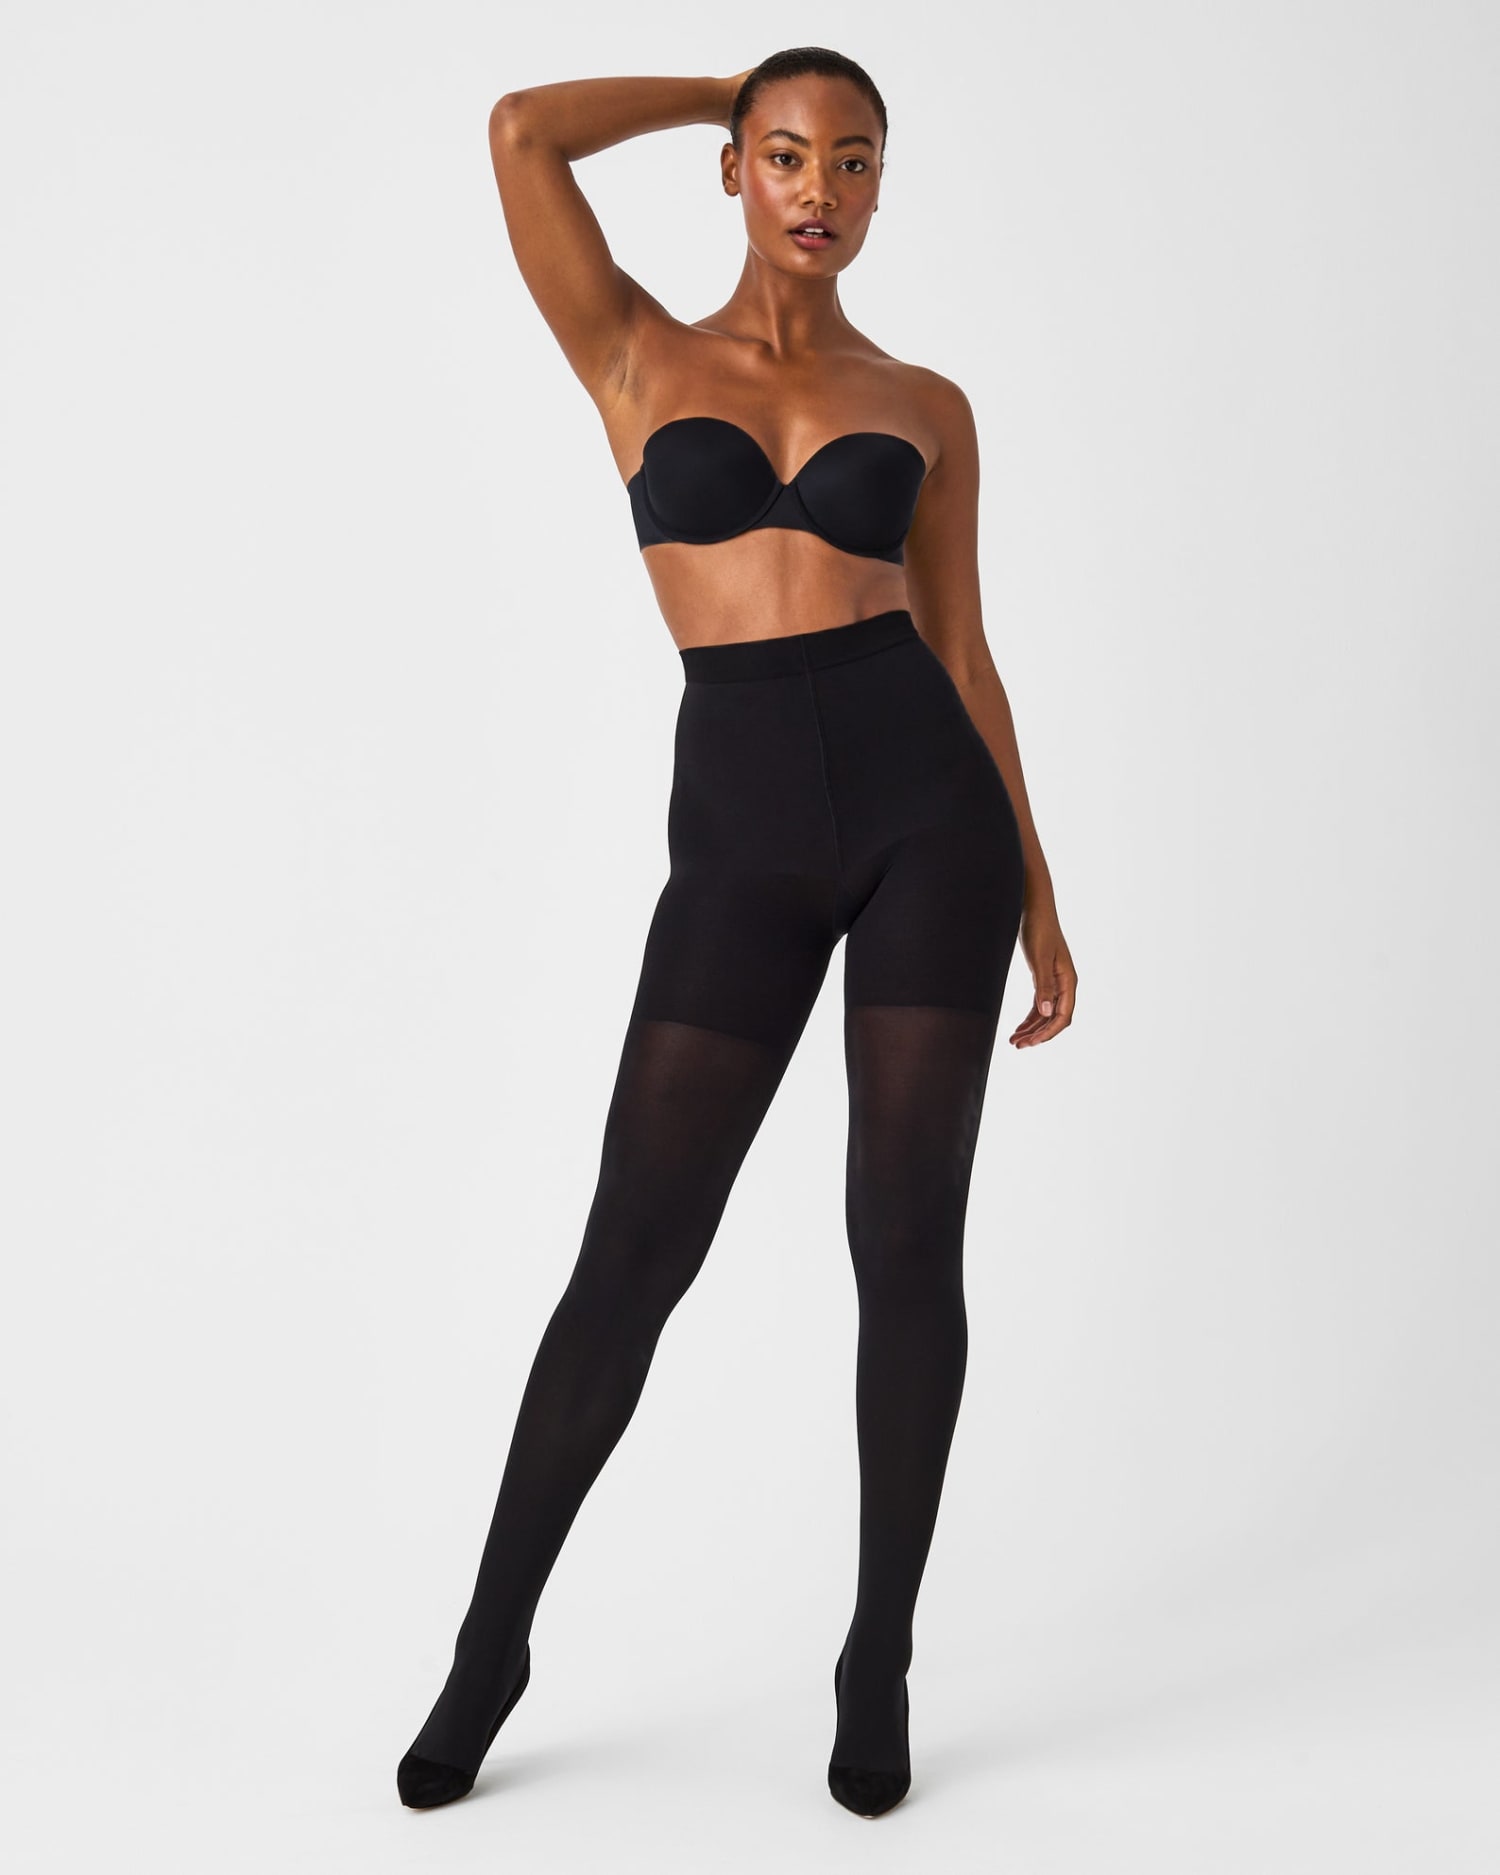 Spanx Cyber Monday Sale Is Still Here: Save On the Celeb-Loved